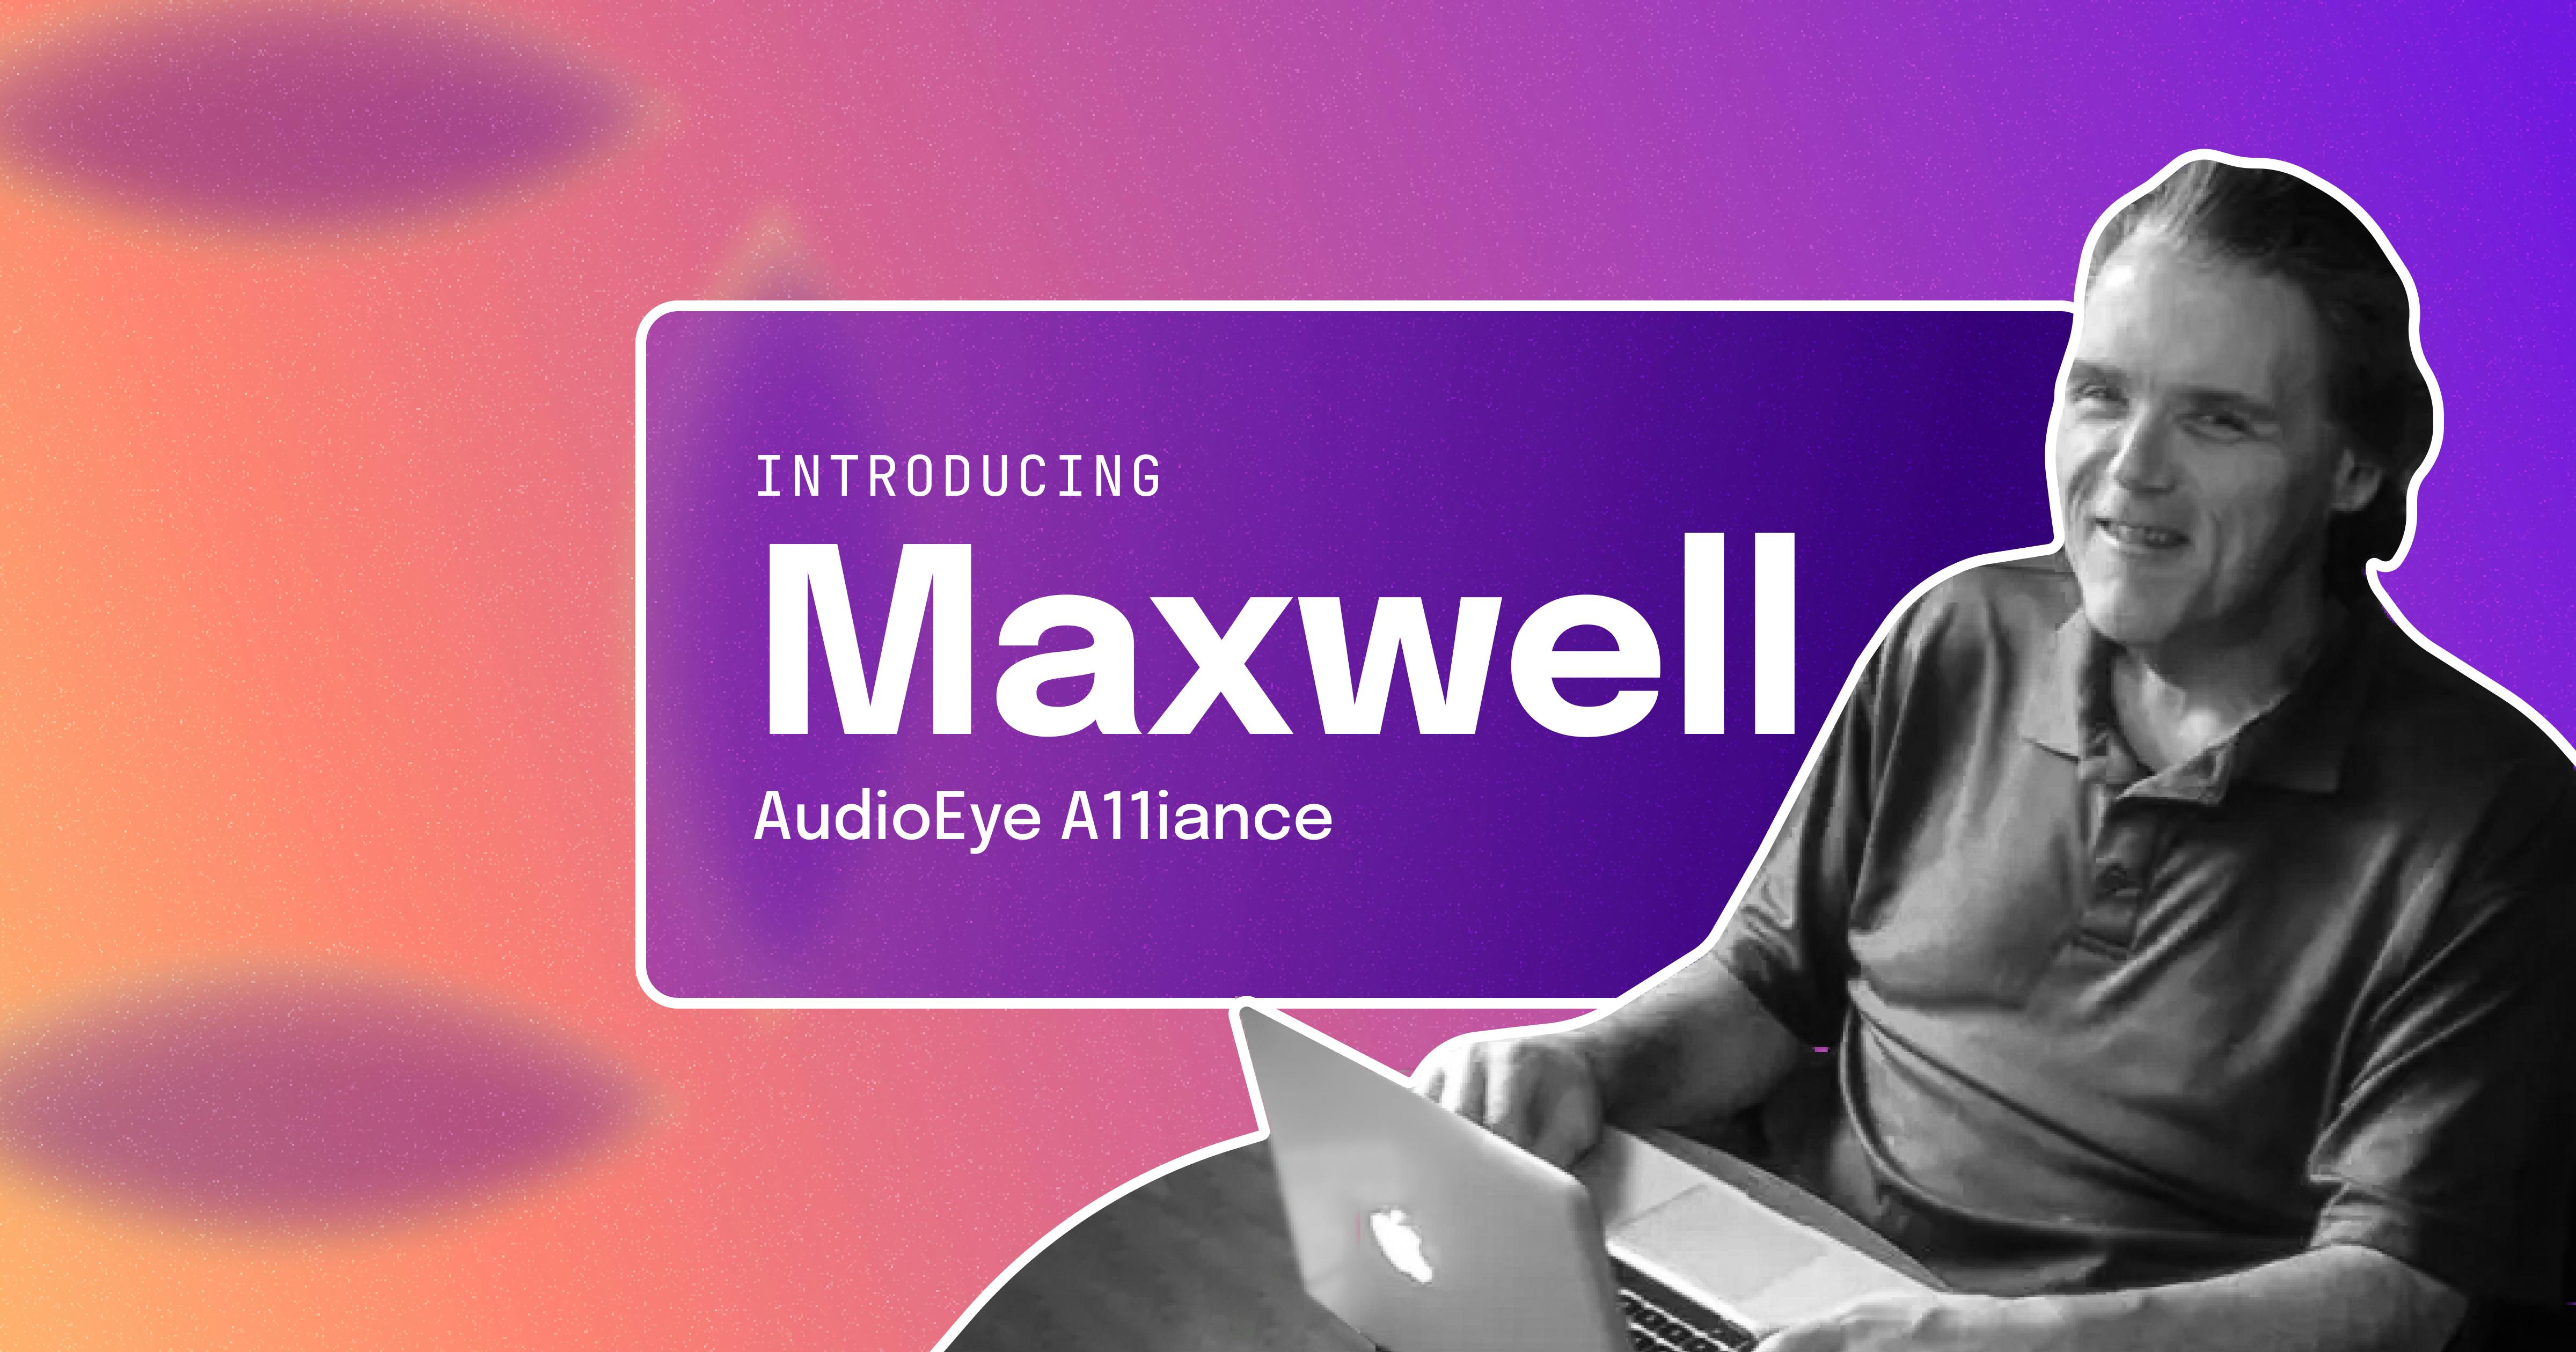 Maxwell Ivey is smiling at the camera behind his laptop. The caption reads "Introducing Maxwell, AudioEye A11iance."